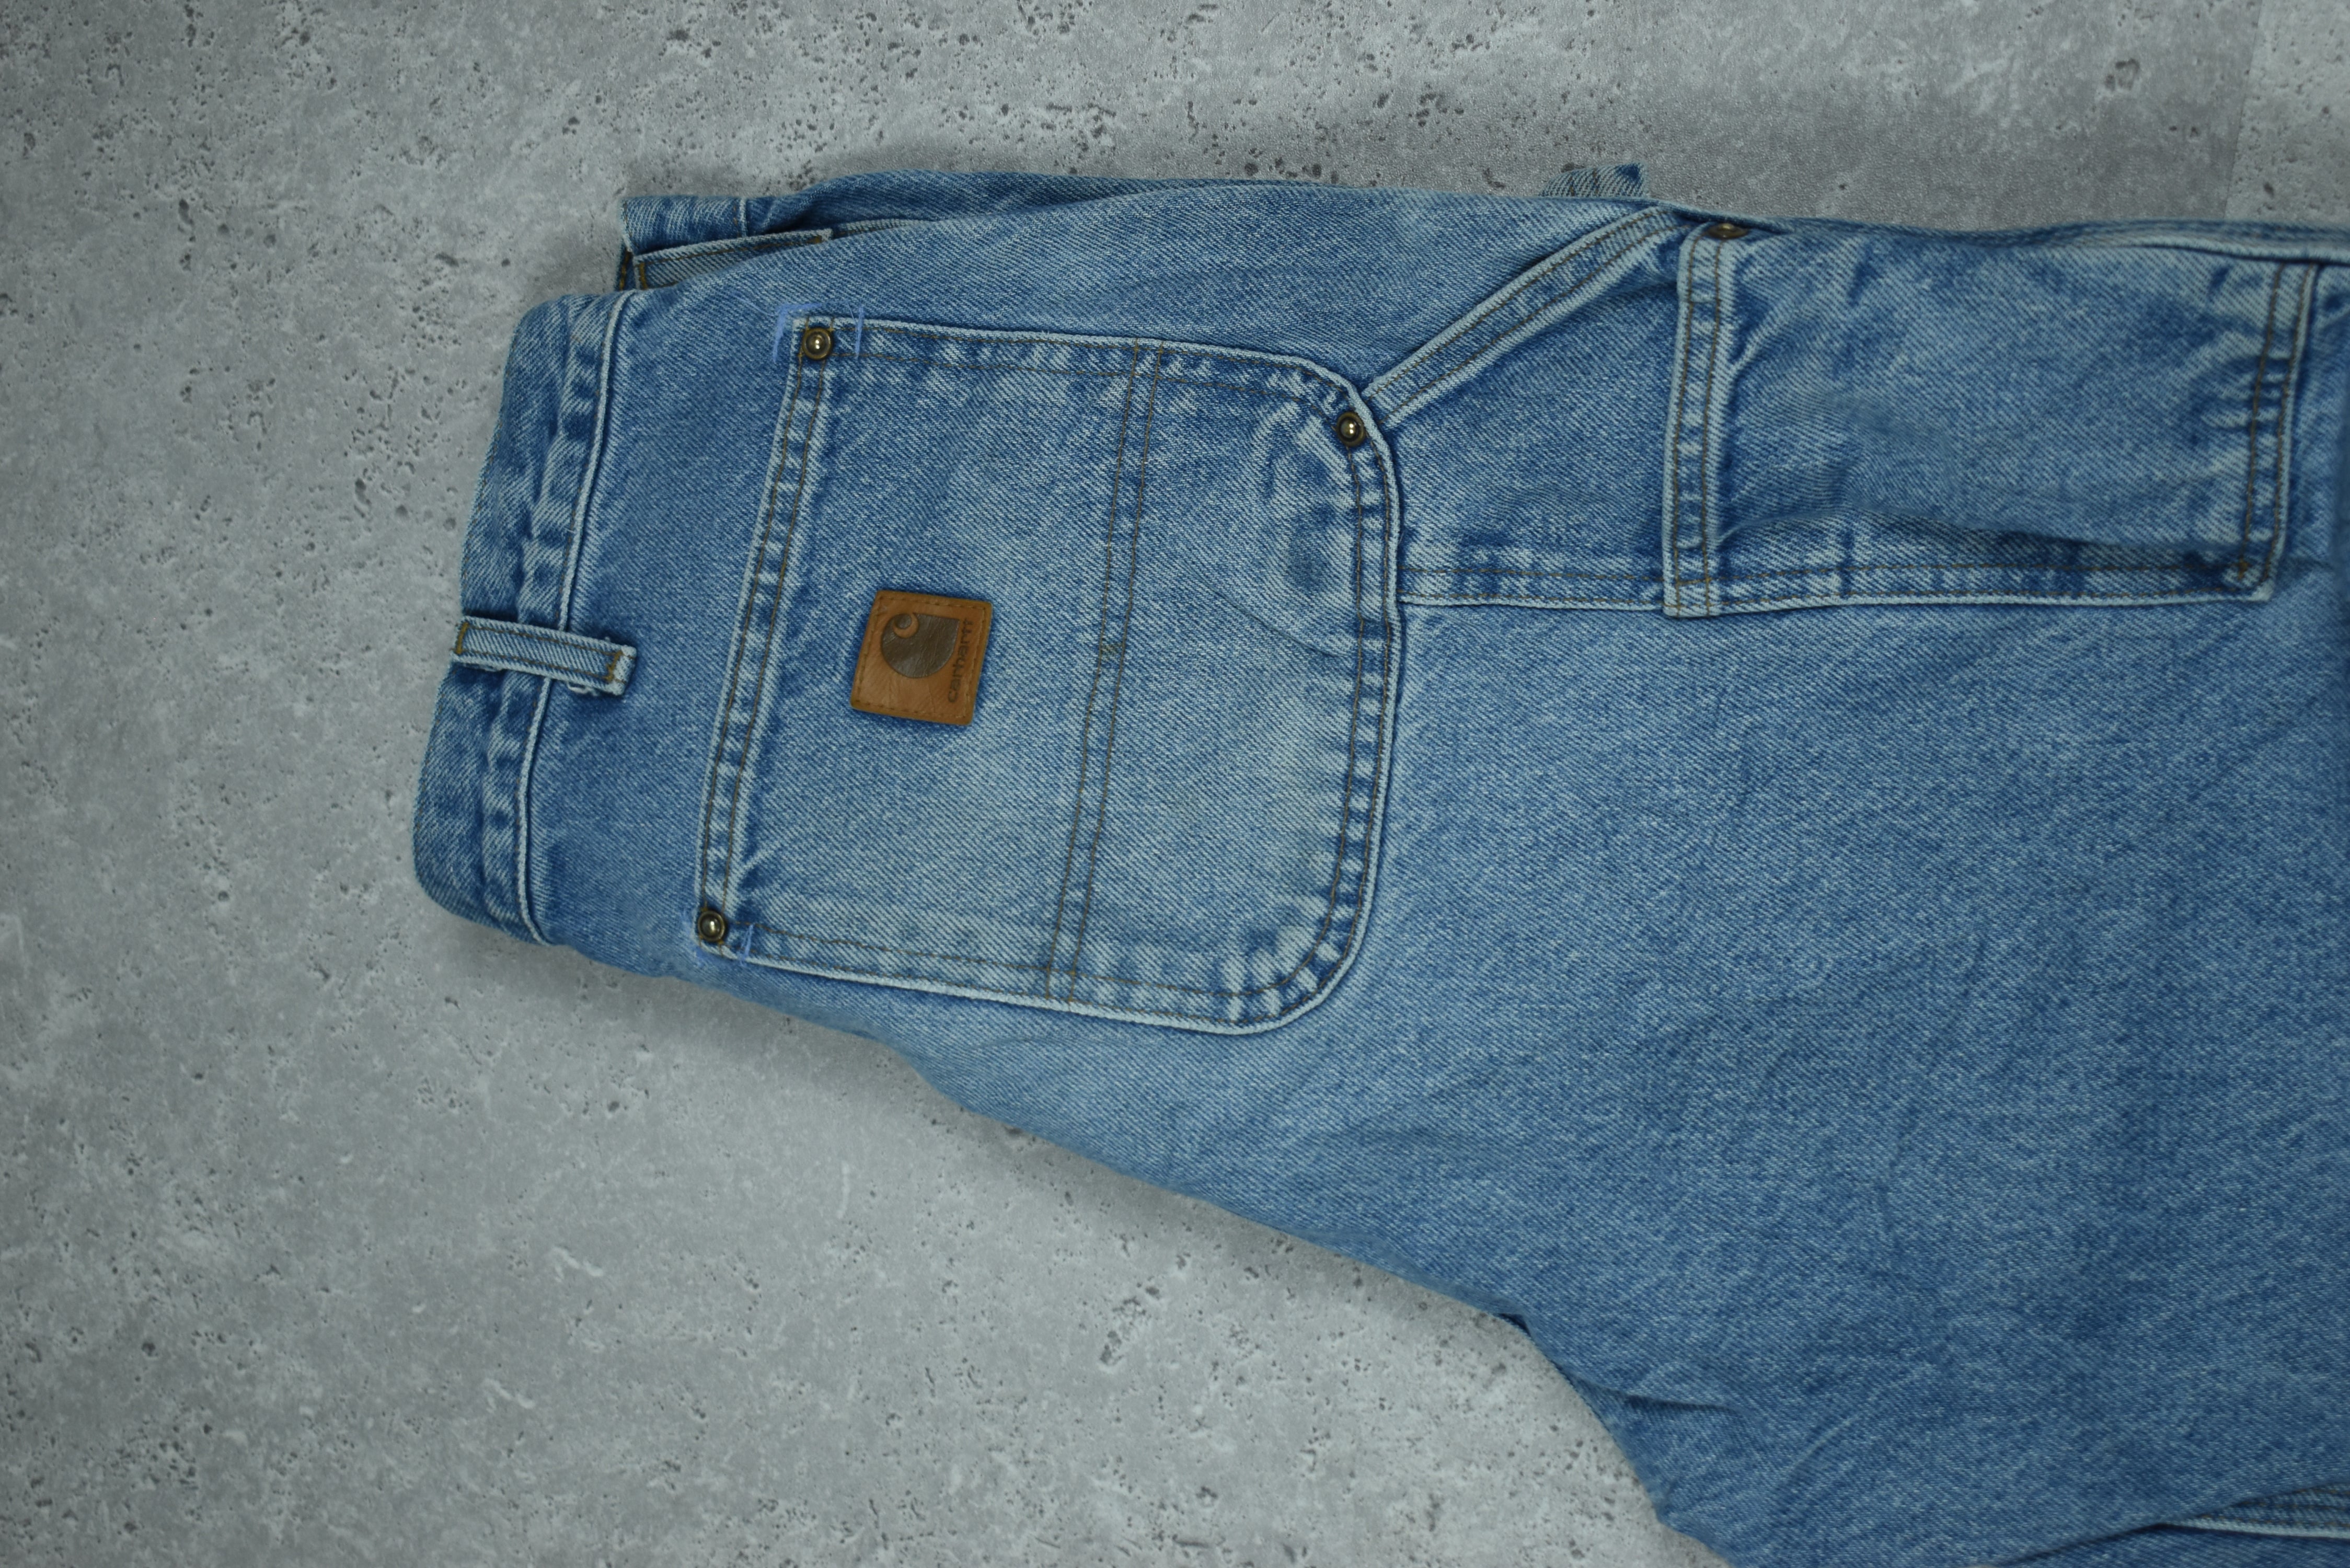 Vintage Carhartt Double Knee Dungarees 33x34